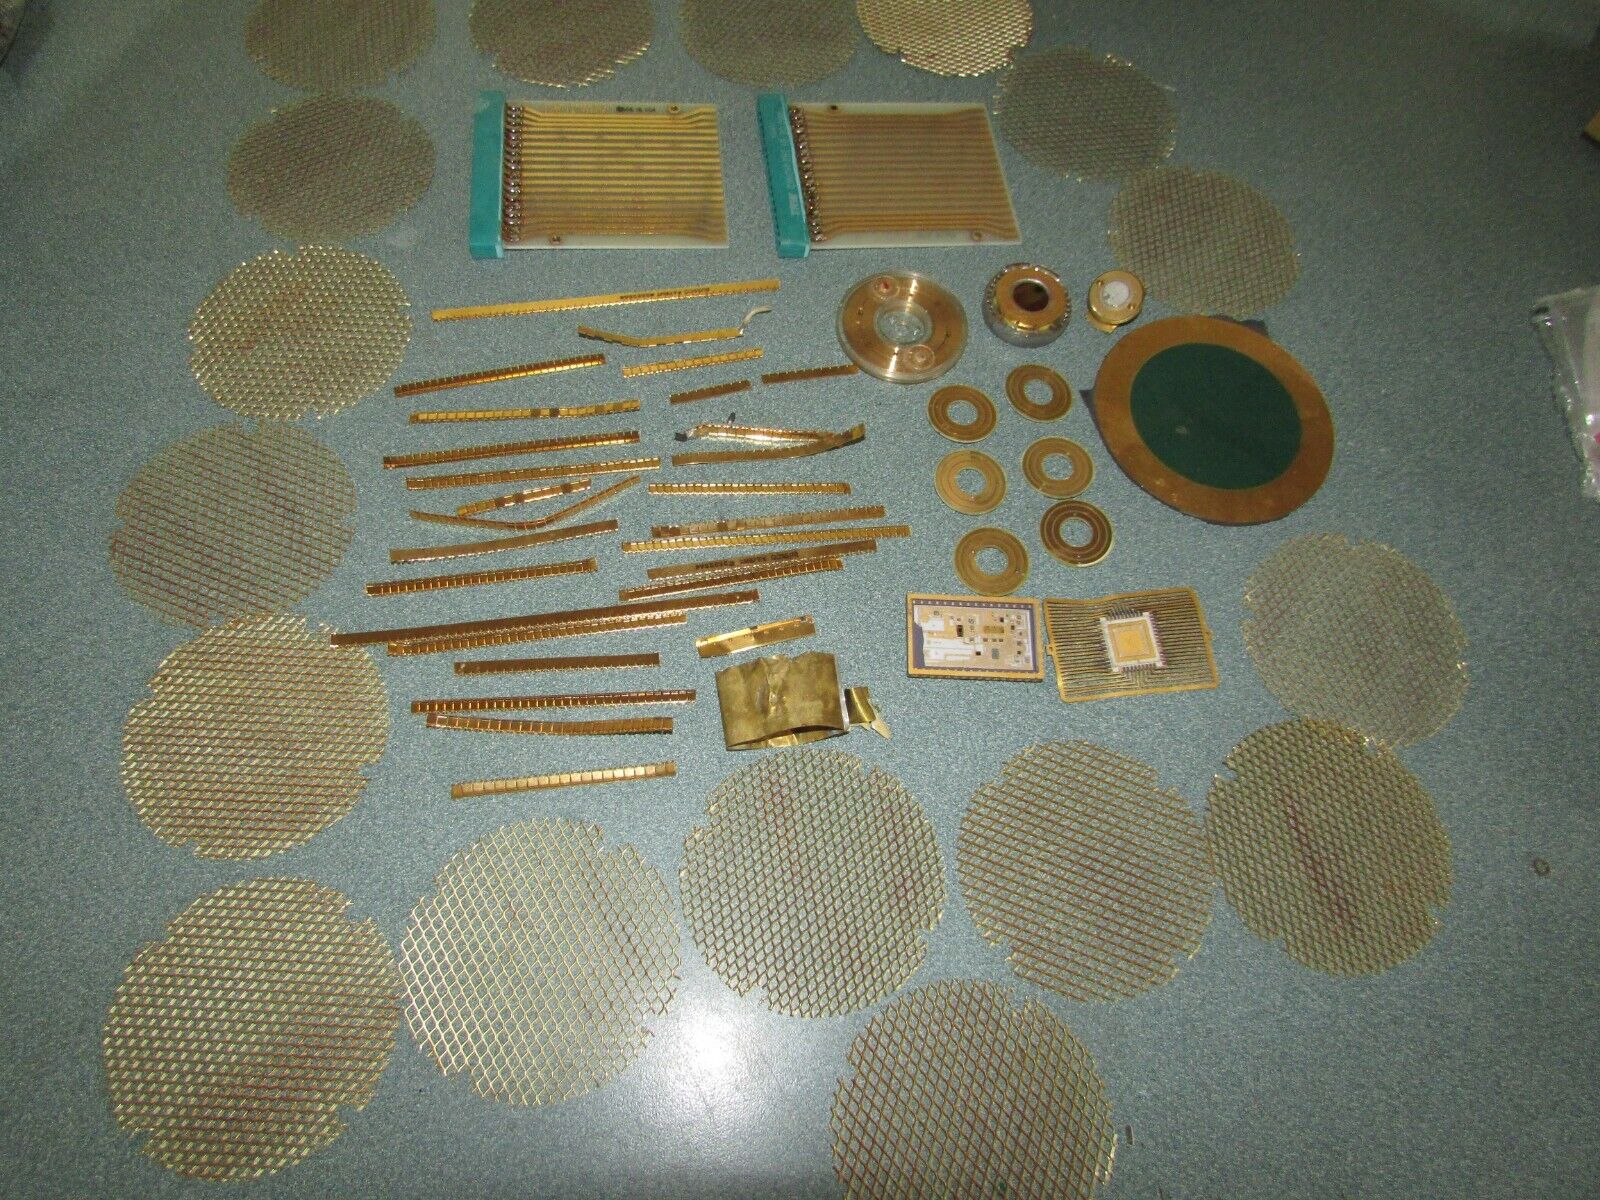 Very Nice Lot of HG Gold Plated Electronics For Scrap Gold Recovery